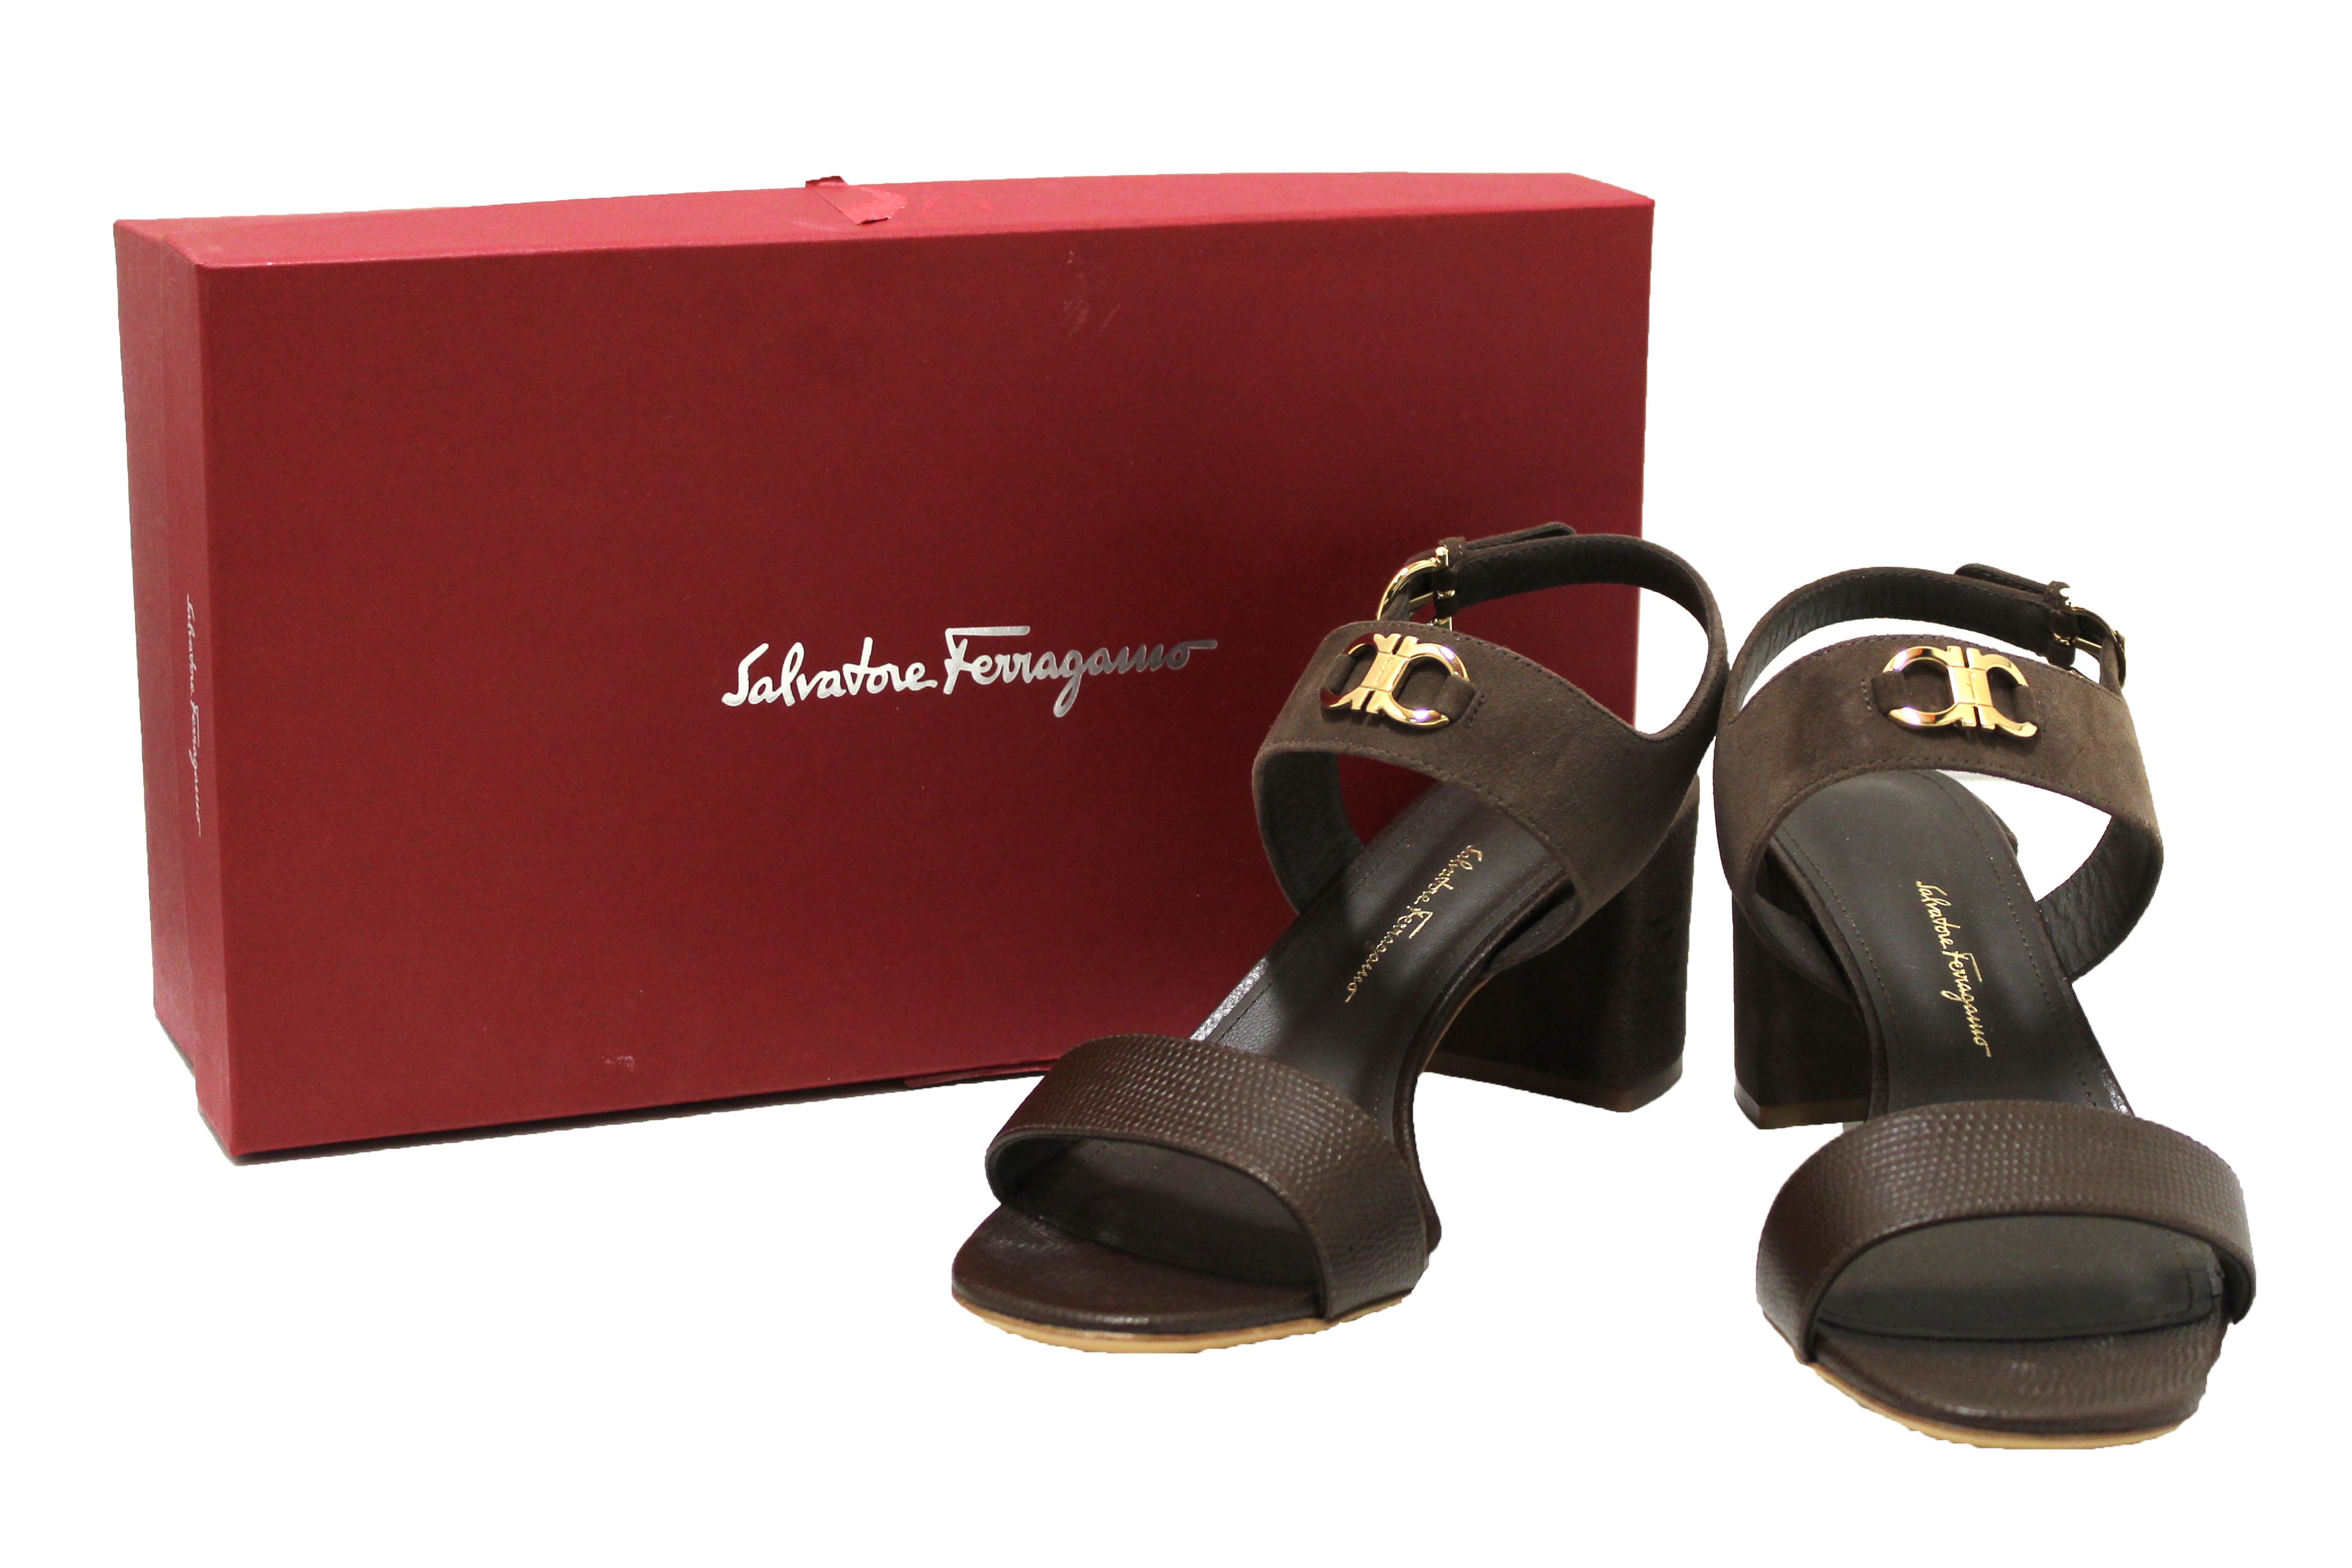 Authentic NEW Salvatore Ferragamo Brown Calf Leather with Muschio Suede Cayla 55 Sandal Size 9C